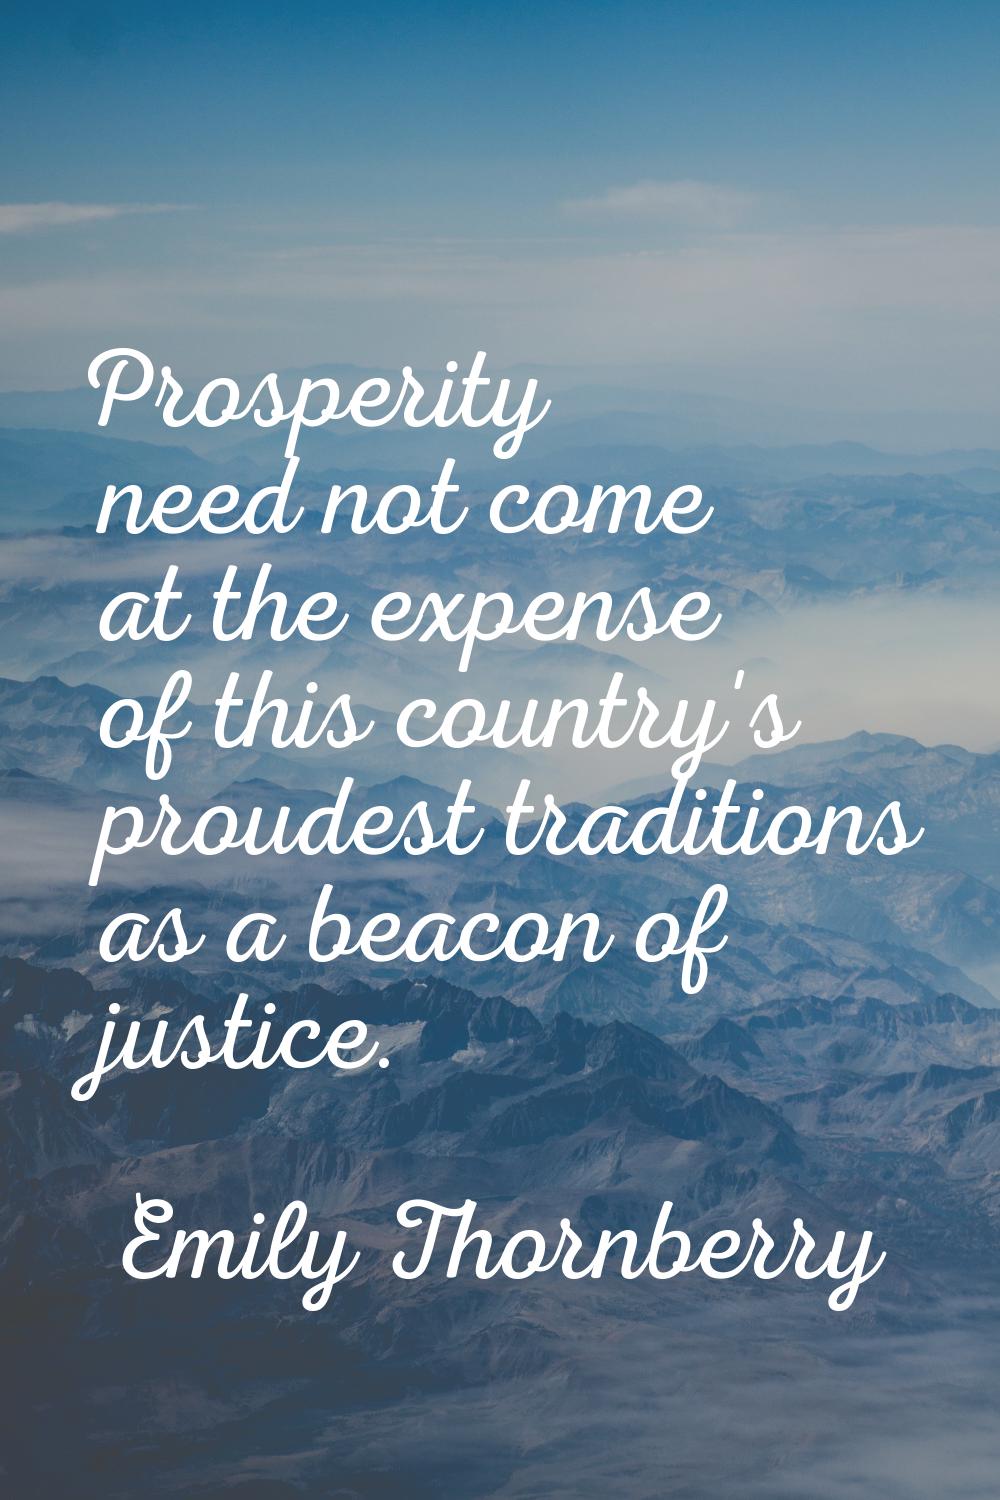 Prosperity need not come at the expense of this country's proudest traditions as a beacon of justic